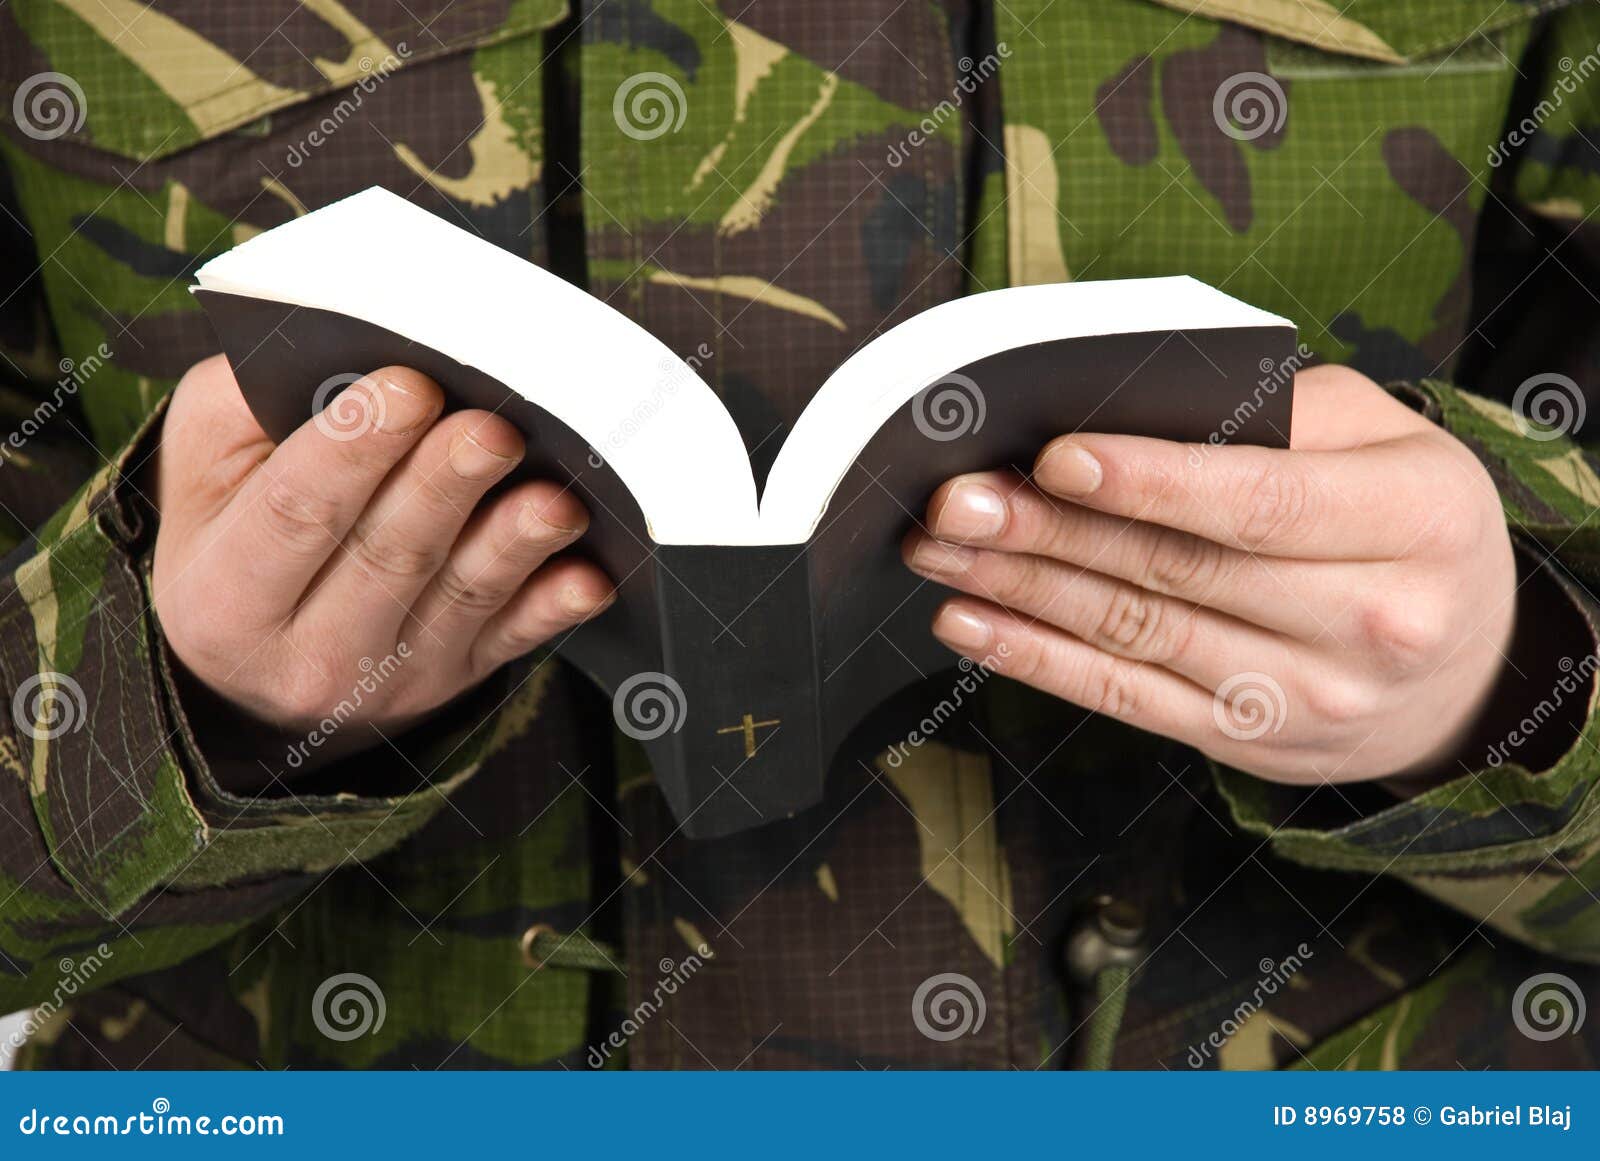 Army Soldier Reading Bible Royalty Free Stock Photos